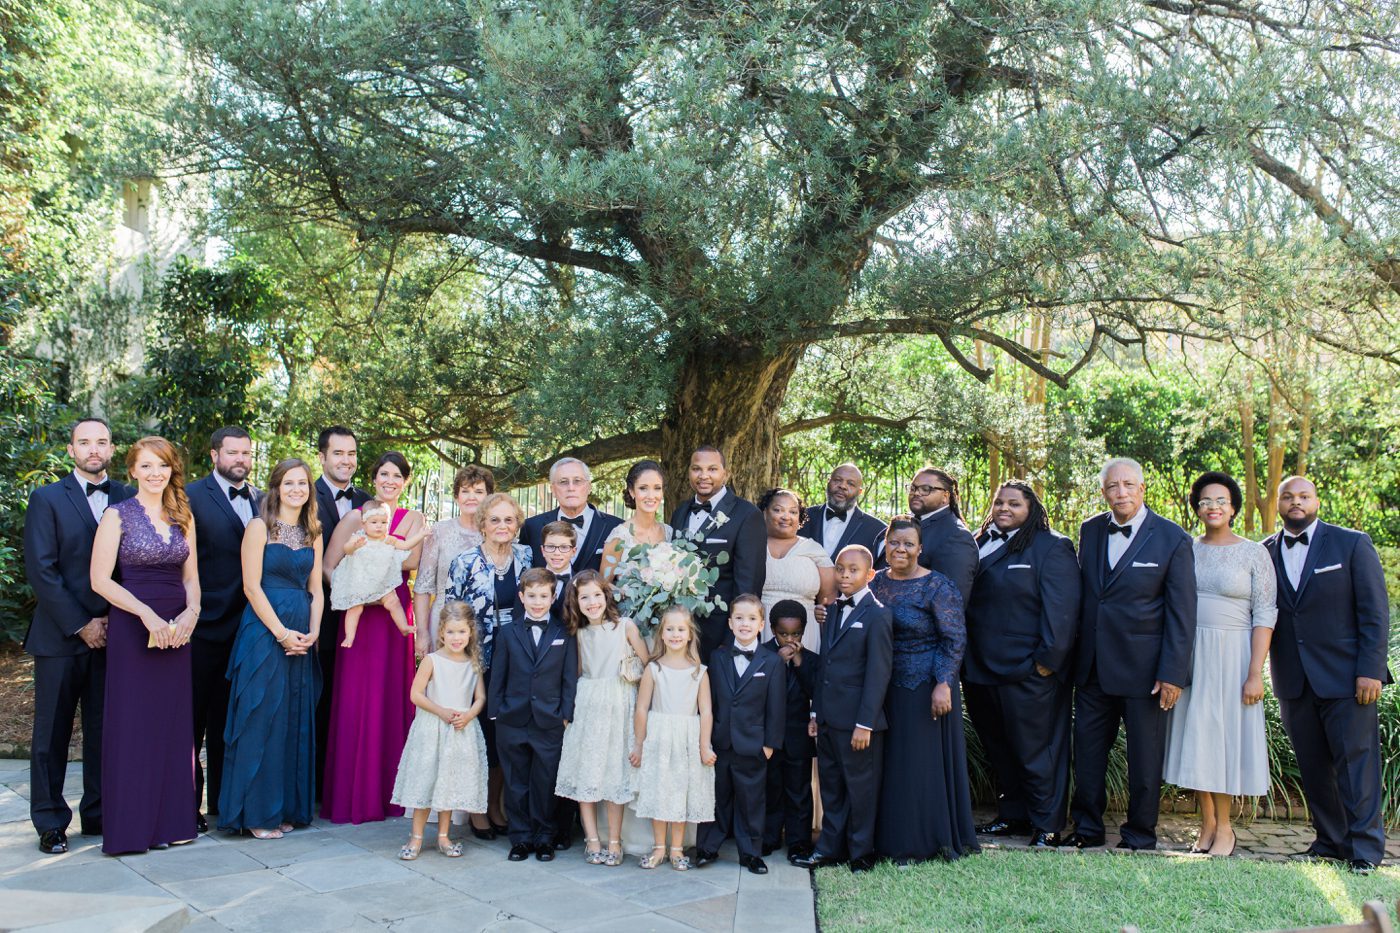 Wedding family picture at William Aiken House | Elegant William Aiken House Wedding Photos | Charleston SC wedding photographers Catherine Ann Photography